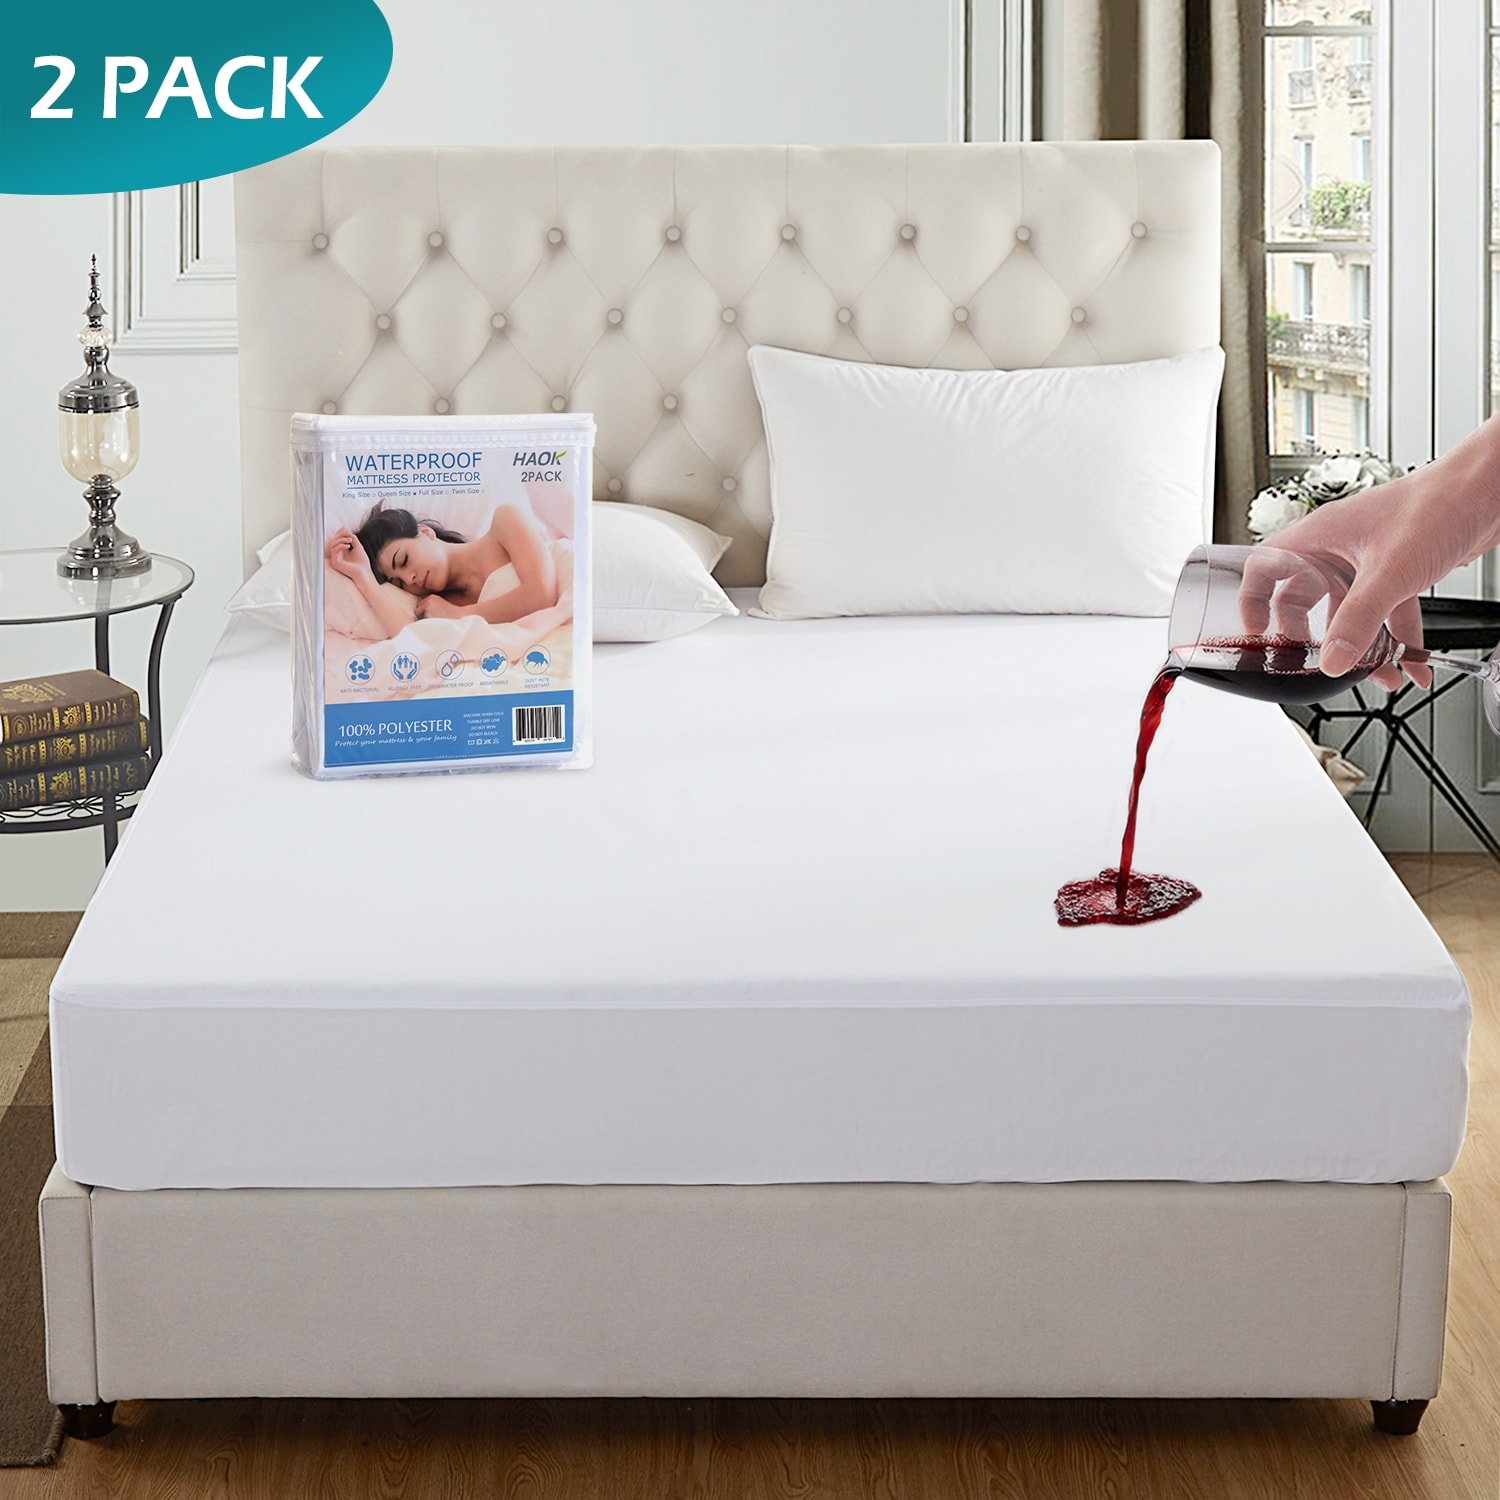 Waterproof Mattress Protector Urine-Proof Stretchable Bed Cover